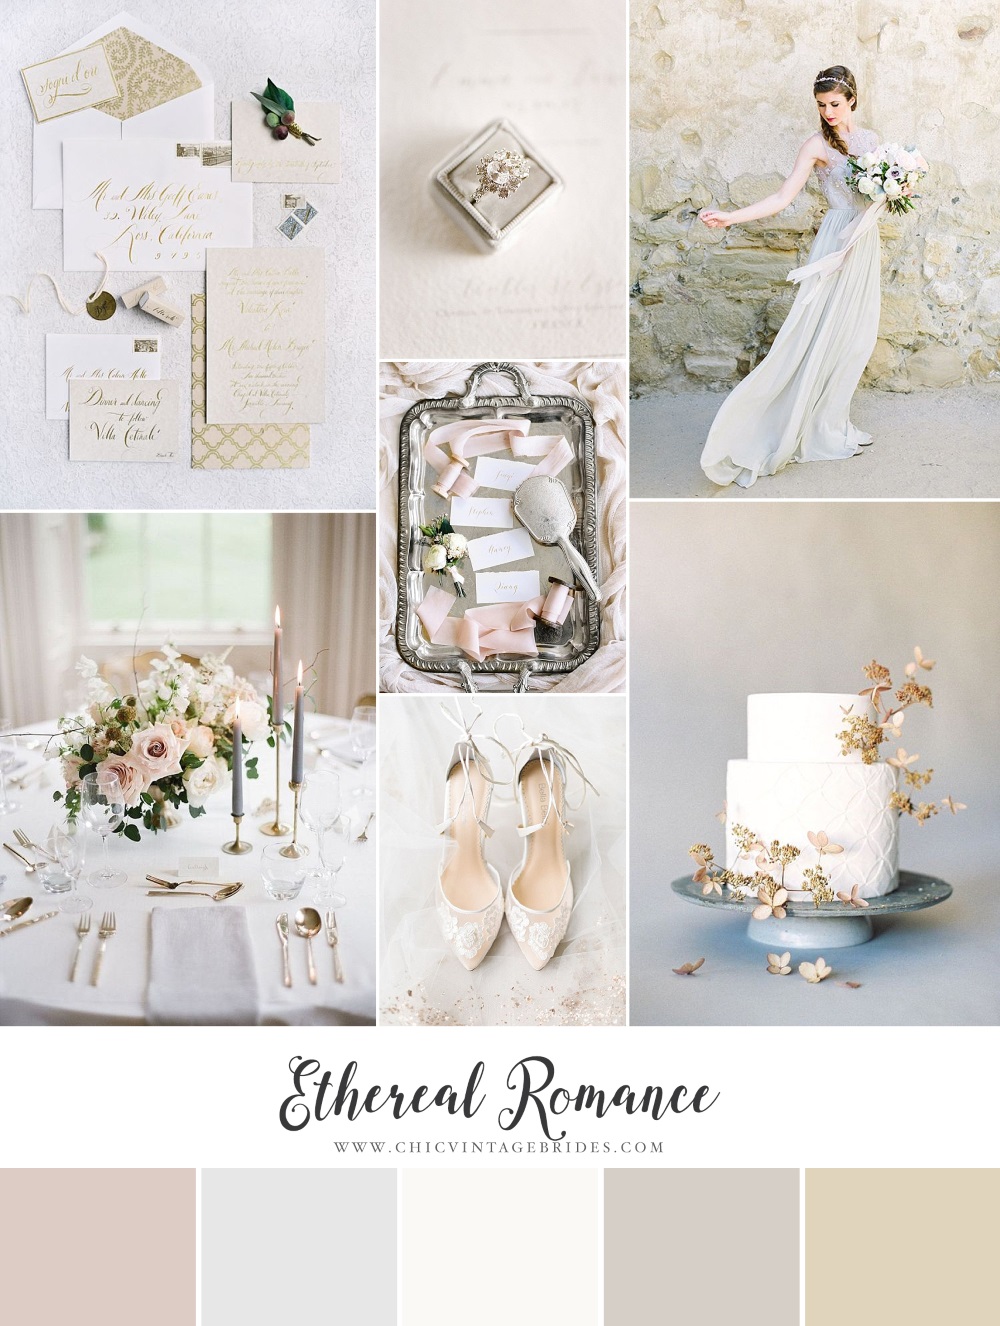 Ethereal Romance - Breathtakingly Romantic Wedding Inspiration in the Softest Shades